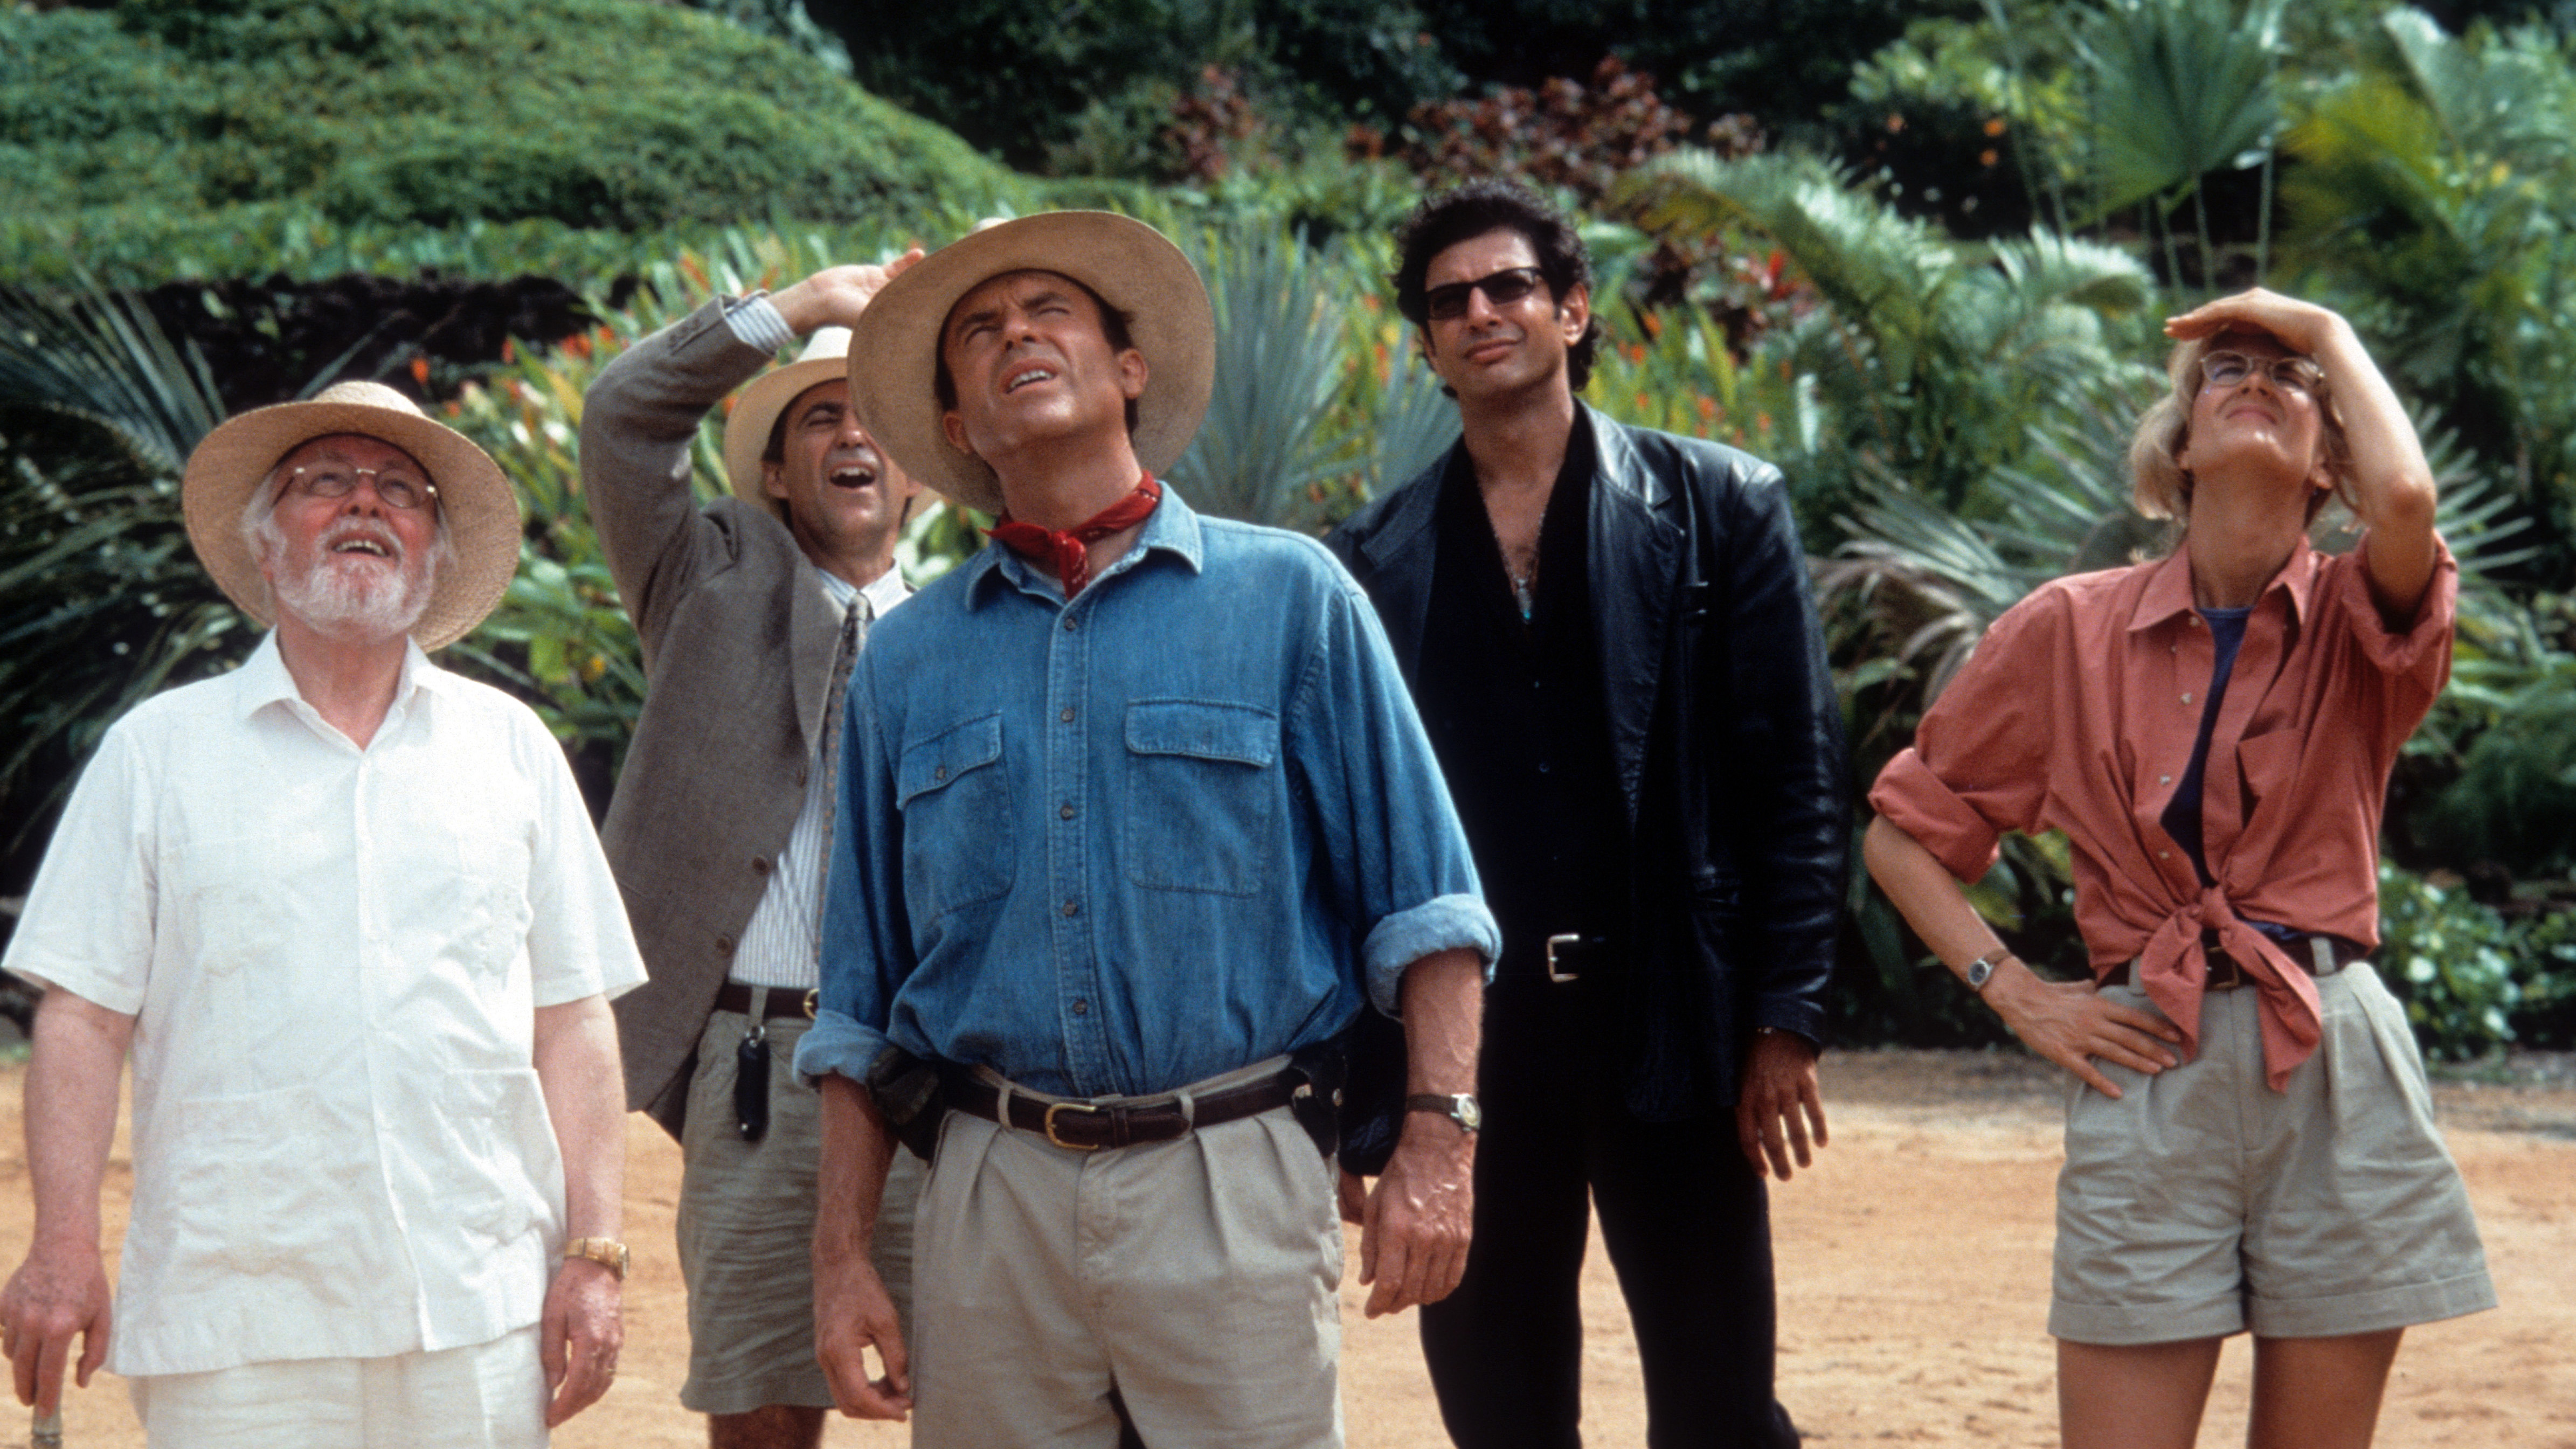 A still from the movie Jurassic Park in which all of the major characters are stood outdoors and looking up at something off camera.